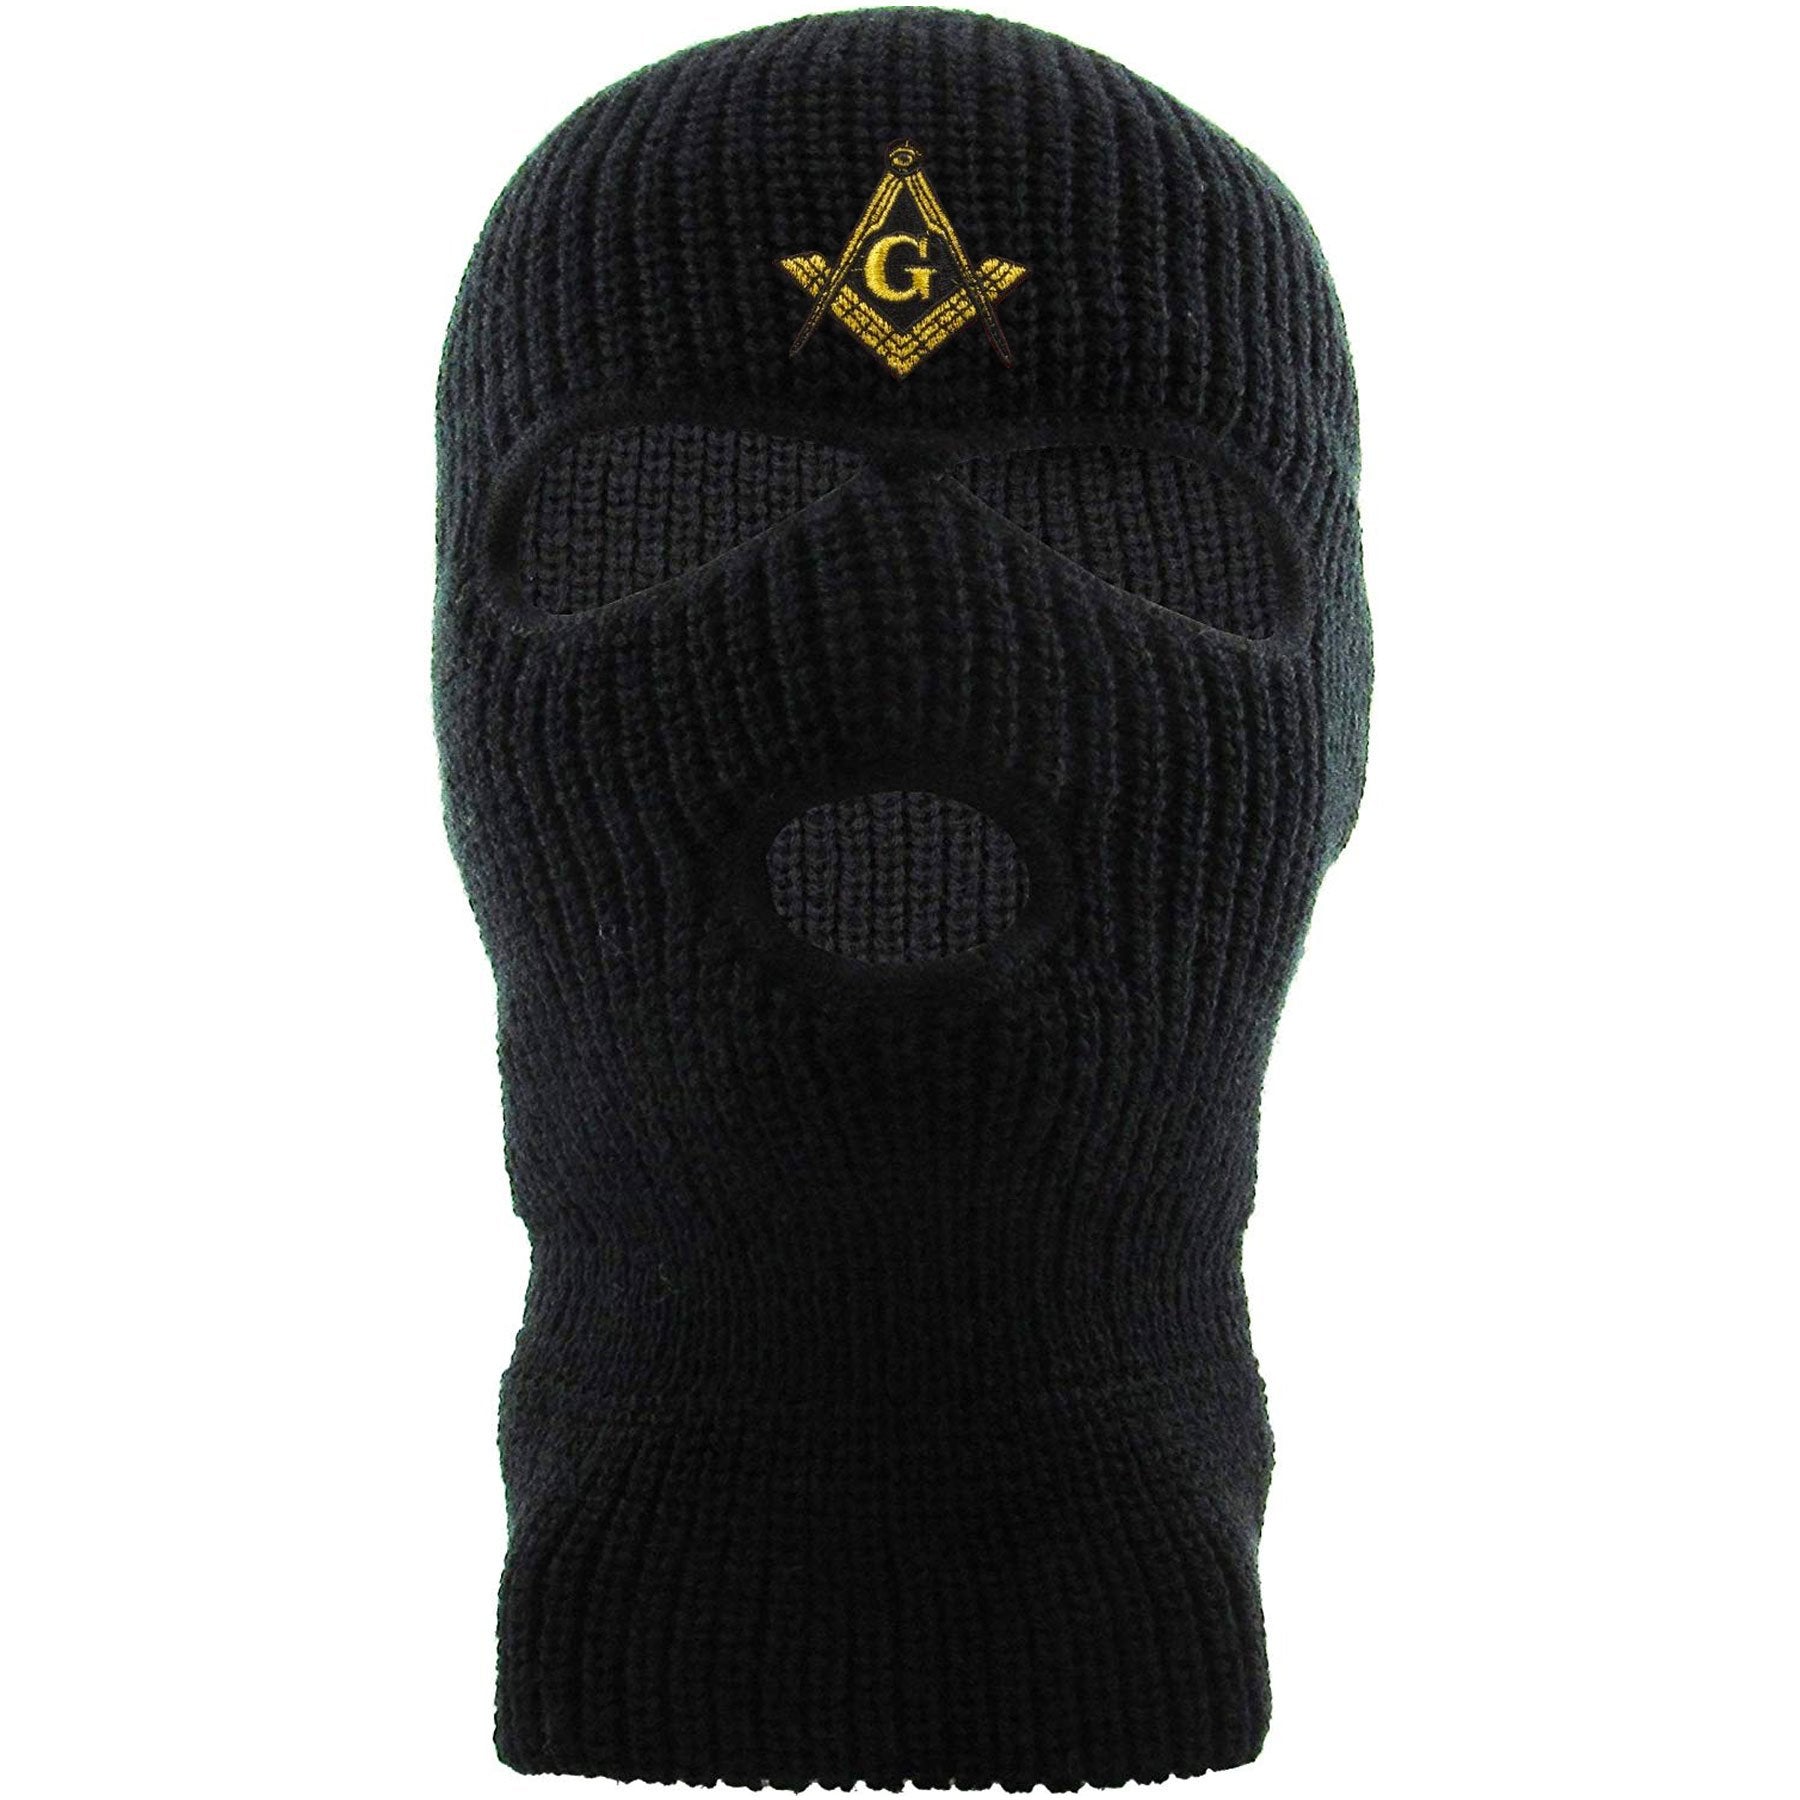 Embroidered on the front of the black mason ski mask is the masonic square compass embroidered in gold and black